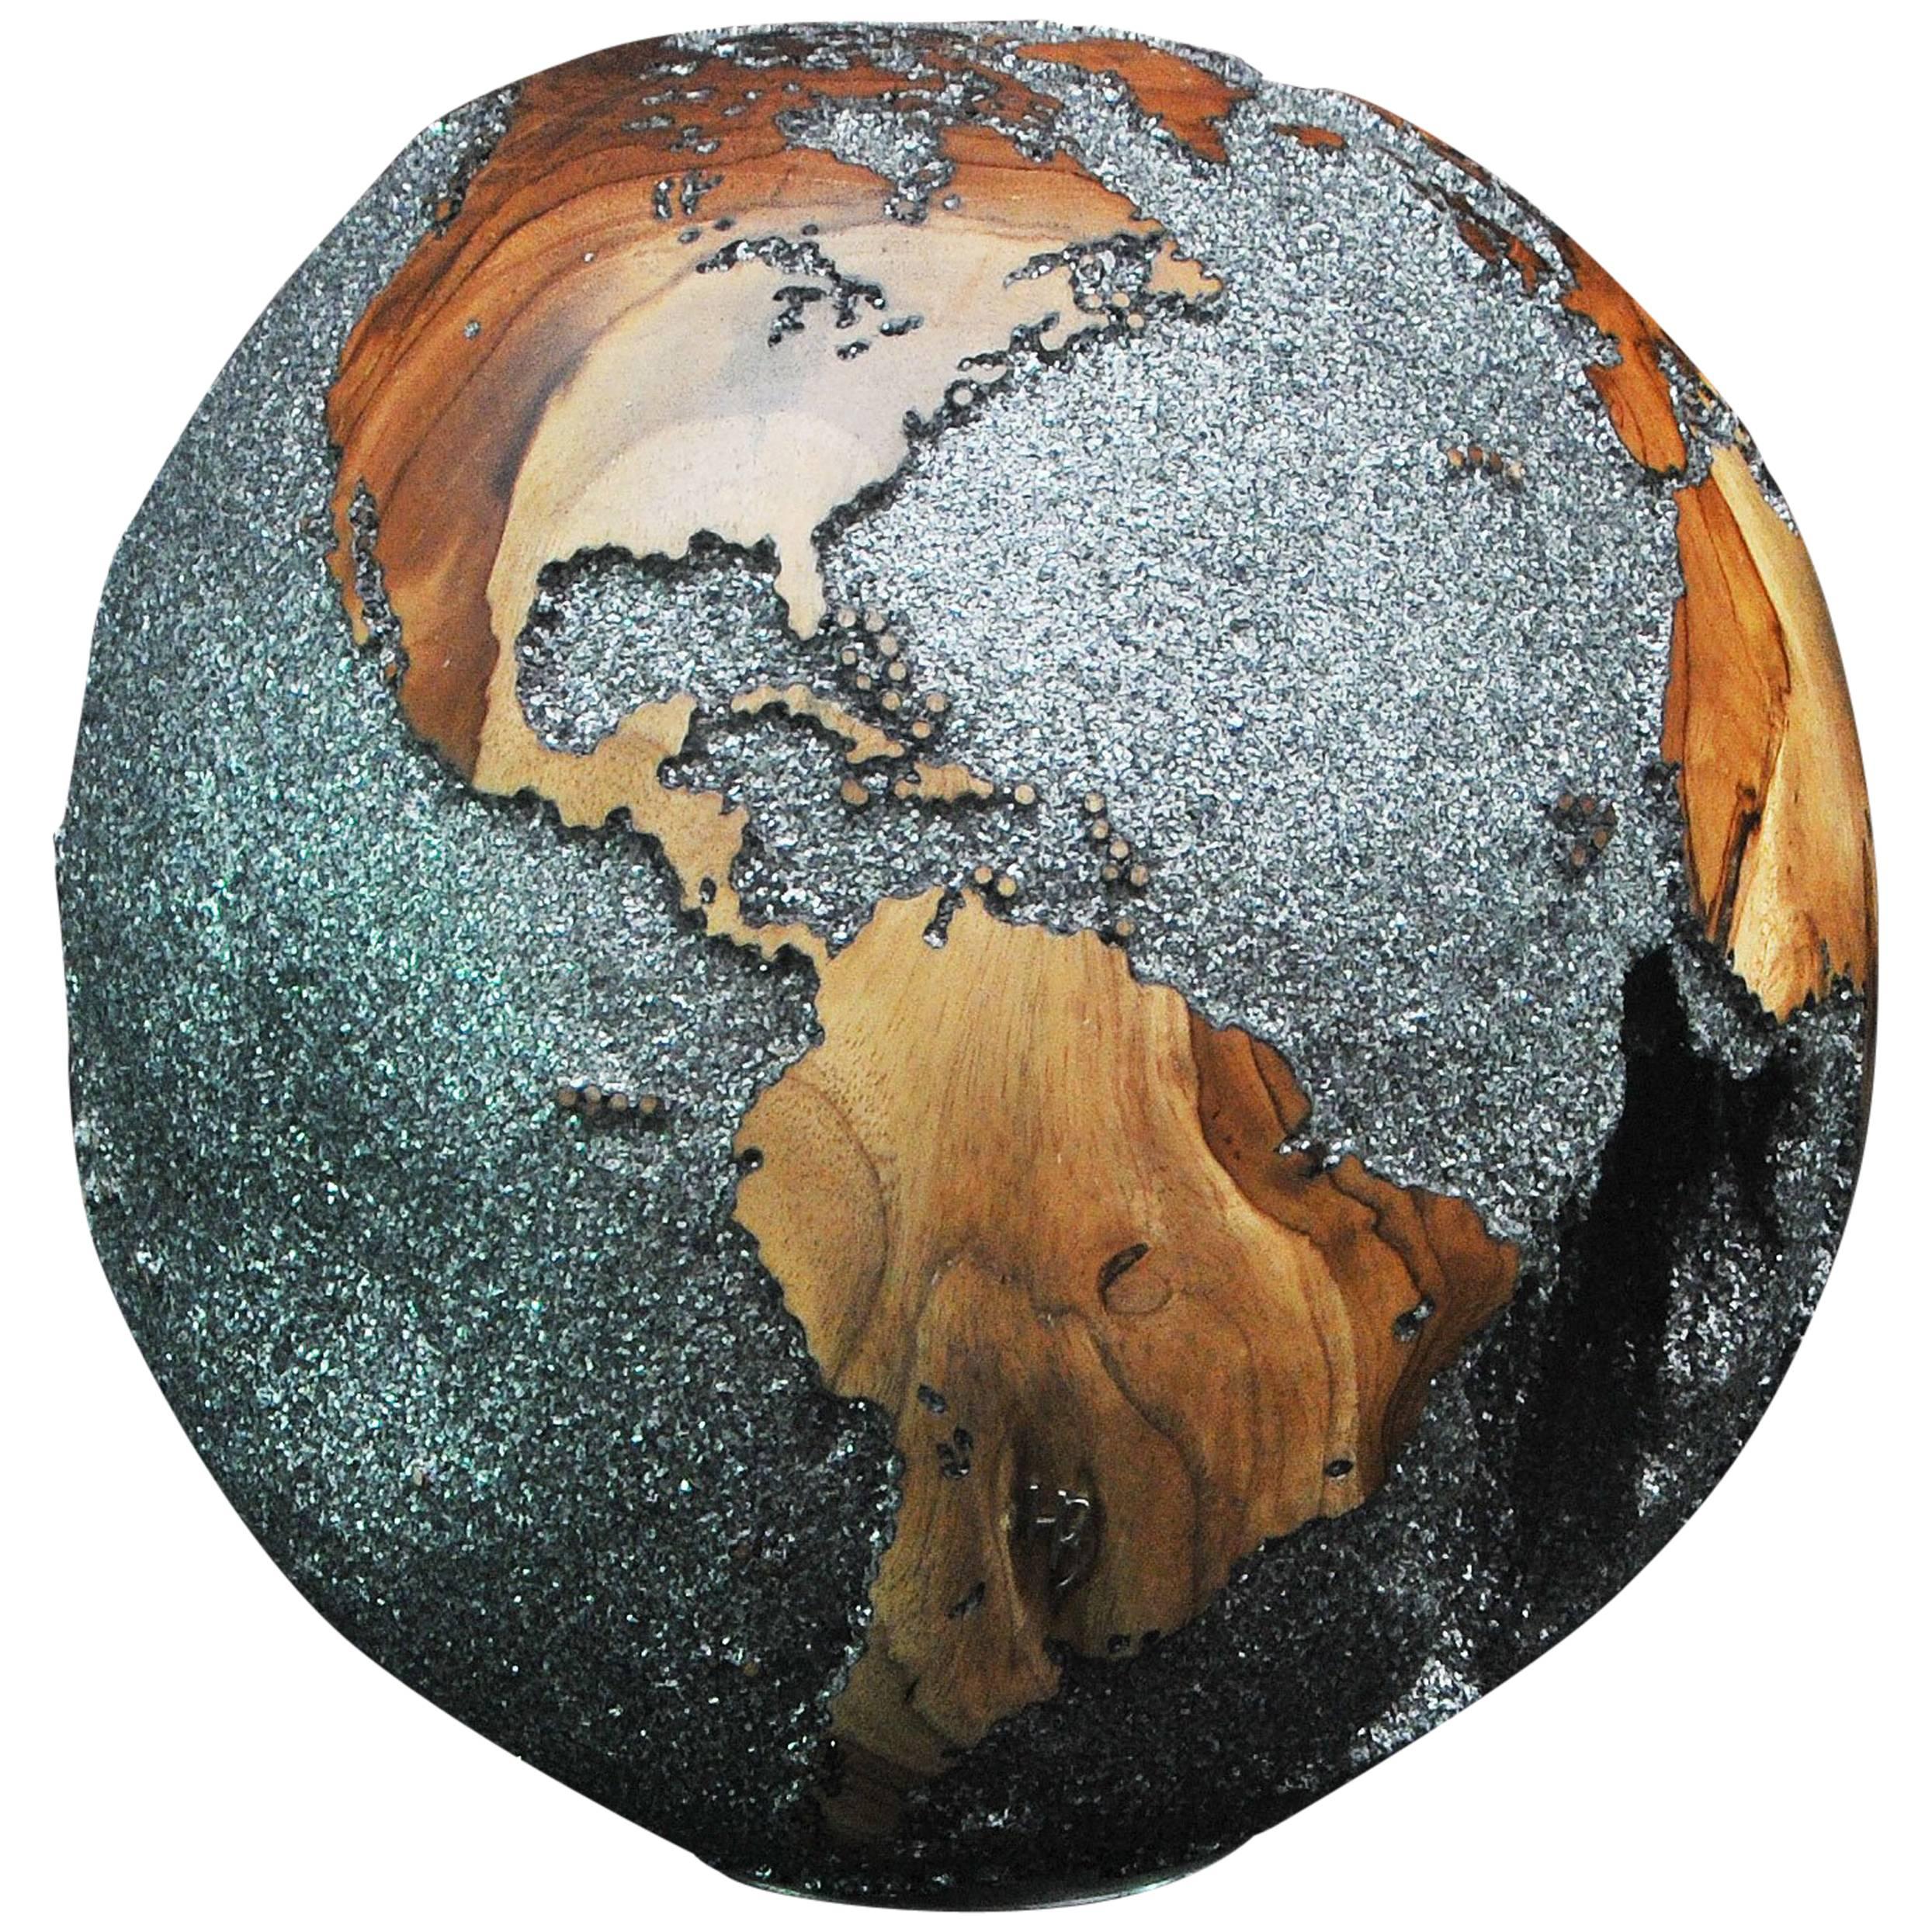 One of a kind Teak Root Globe in Black Mica with Rotative Base - 9.84 in/25 cm